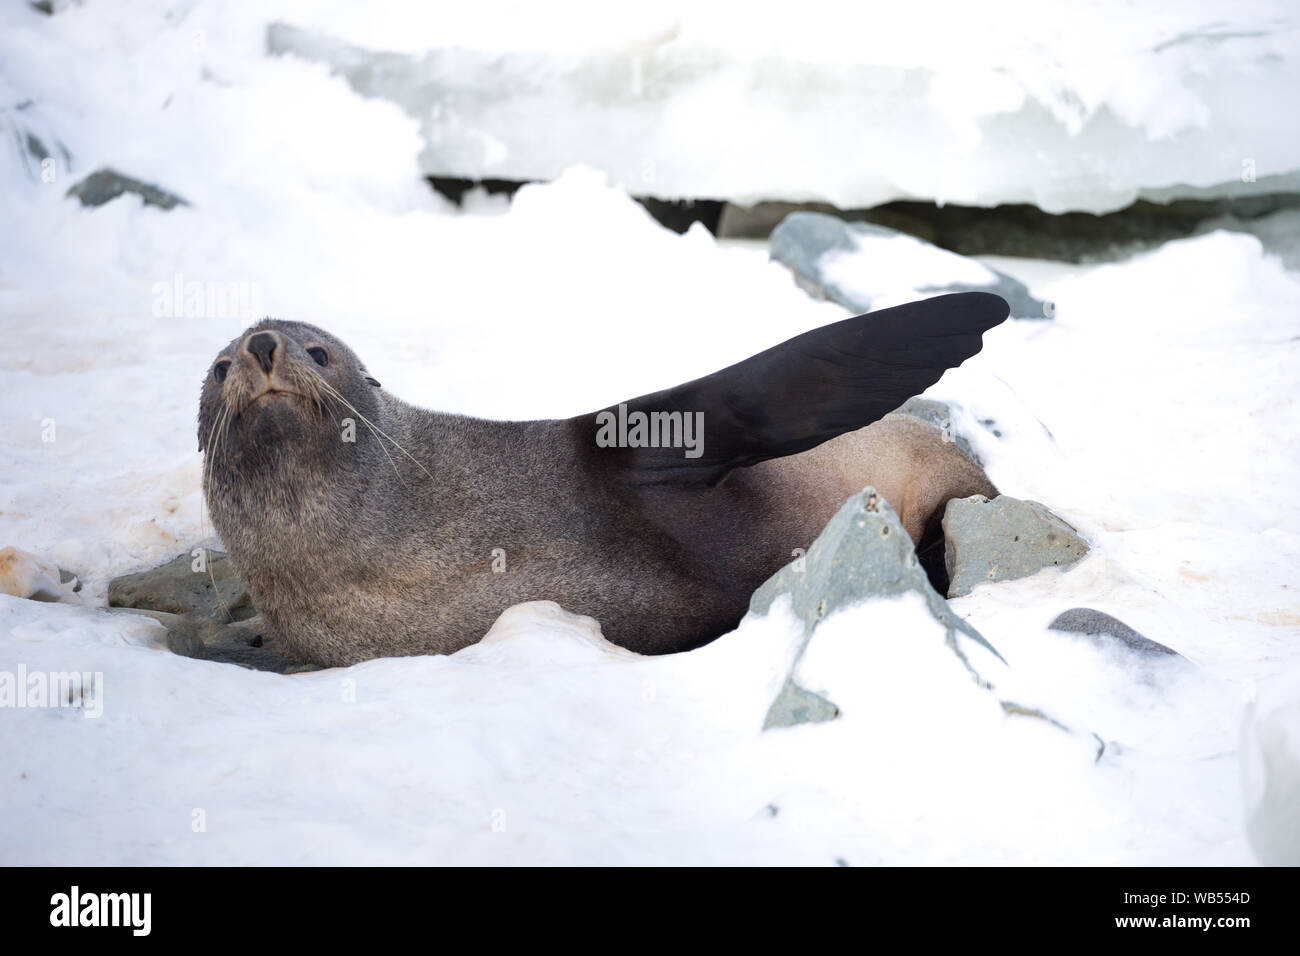 The Antarctic fur seal, sometimes called the Kerguelen fur seal, also known as Arctocephalus gazella sitting on the ice in Antarctic. Stock Photo